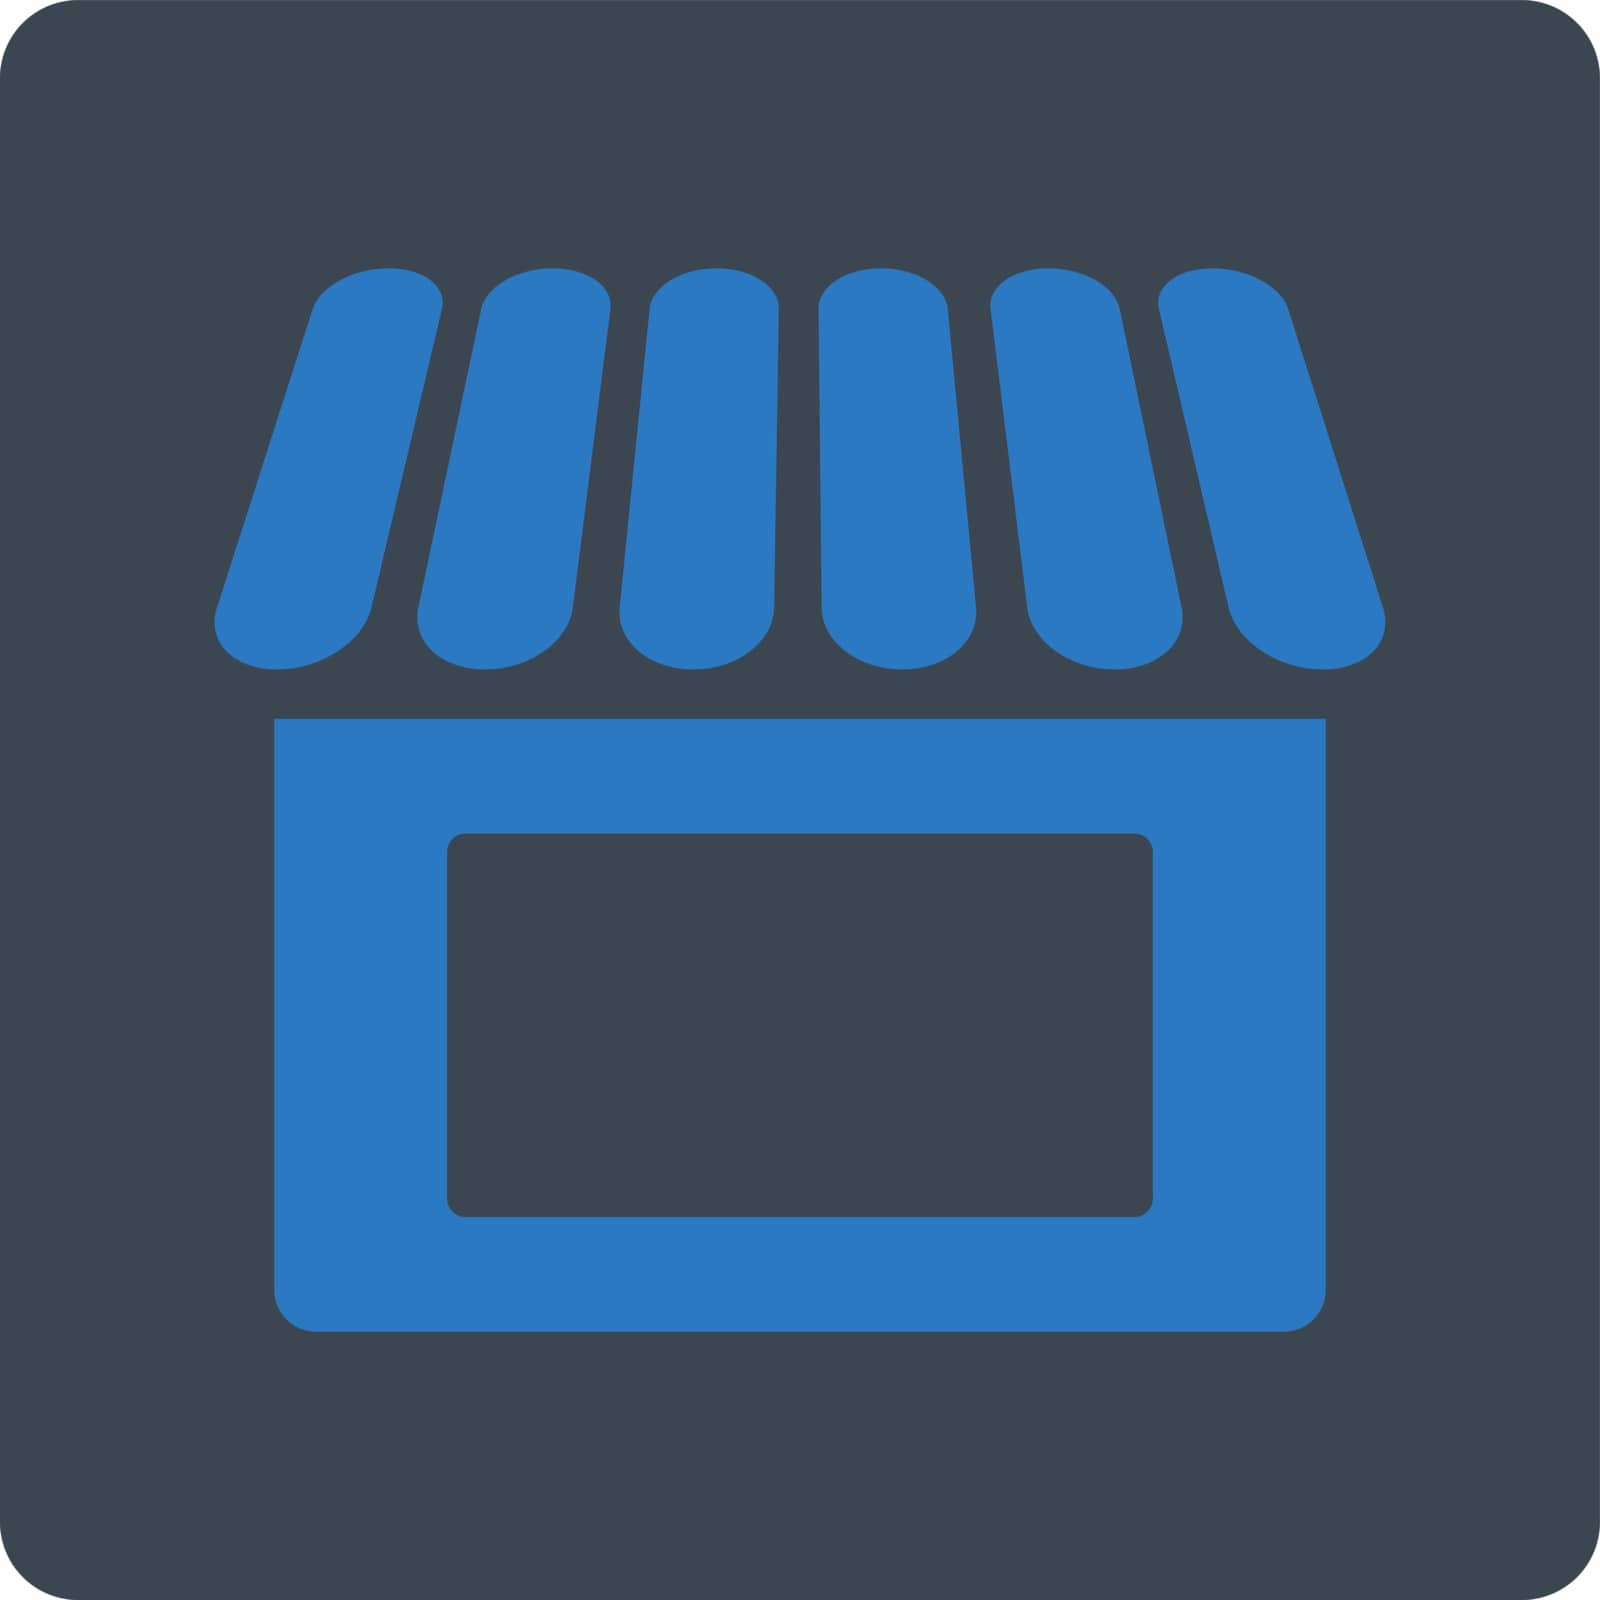 Shop icon. This flat rounded square button uses smooth blue colors and isolated on a white background.